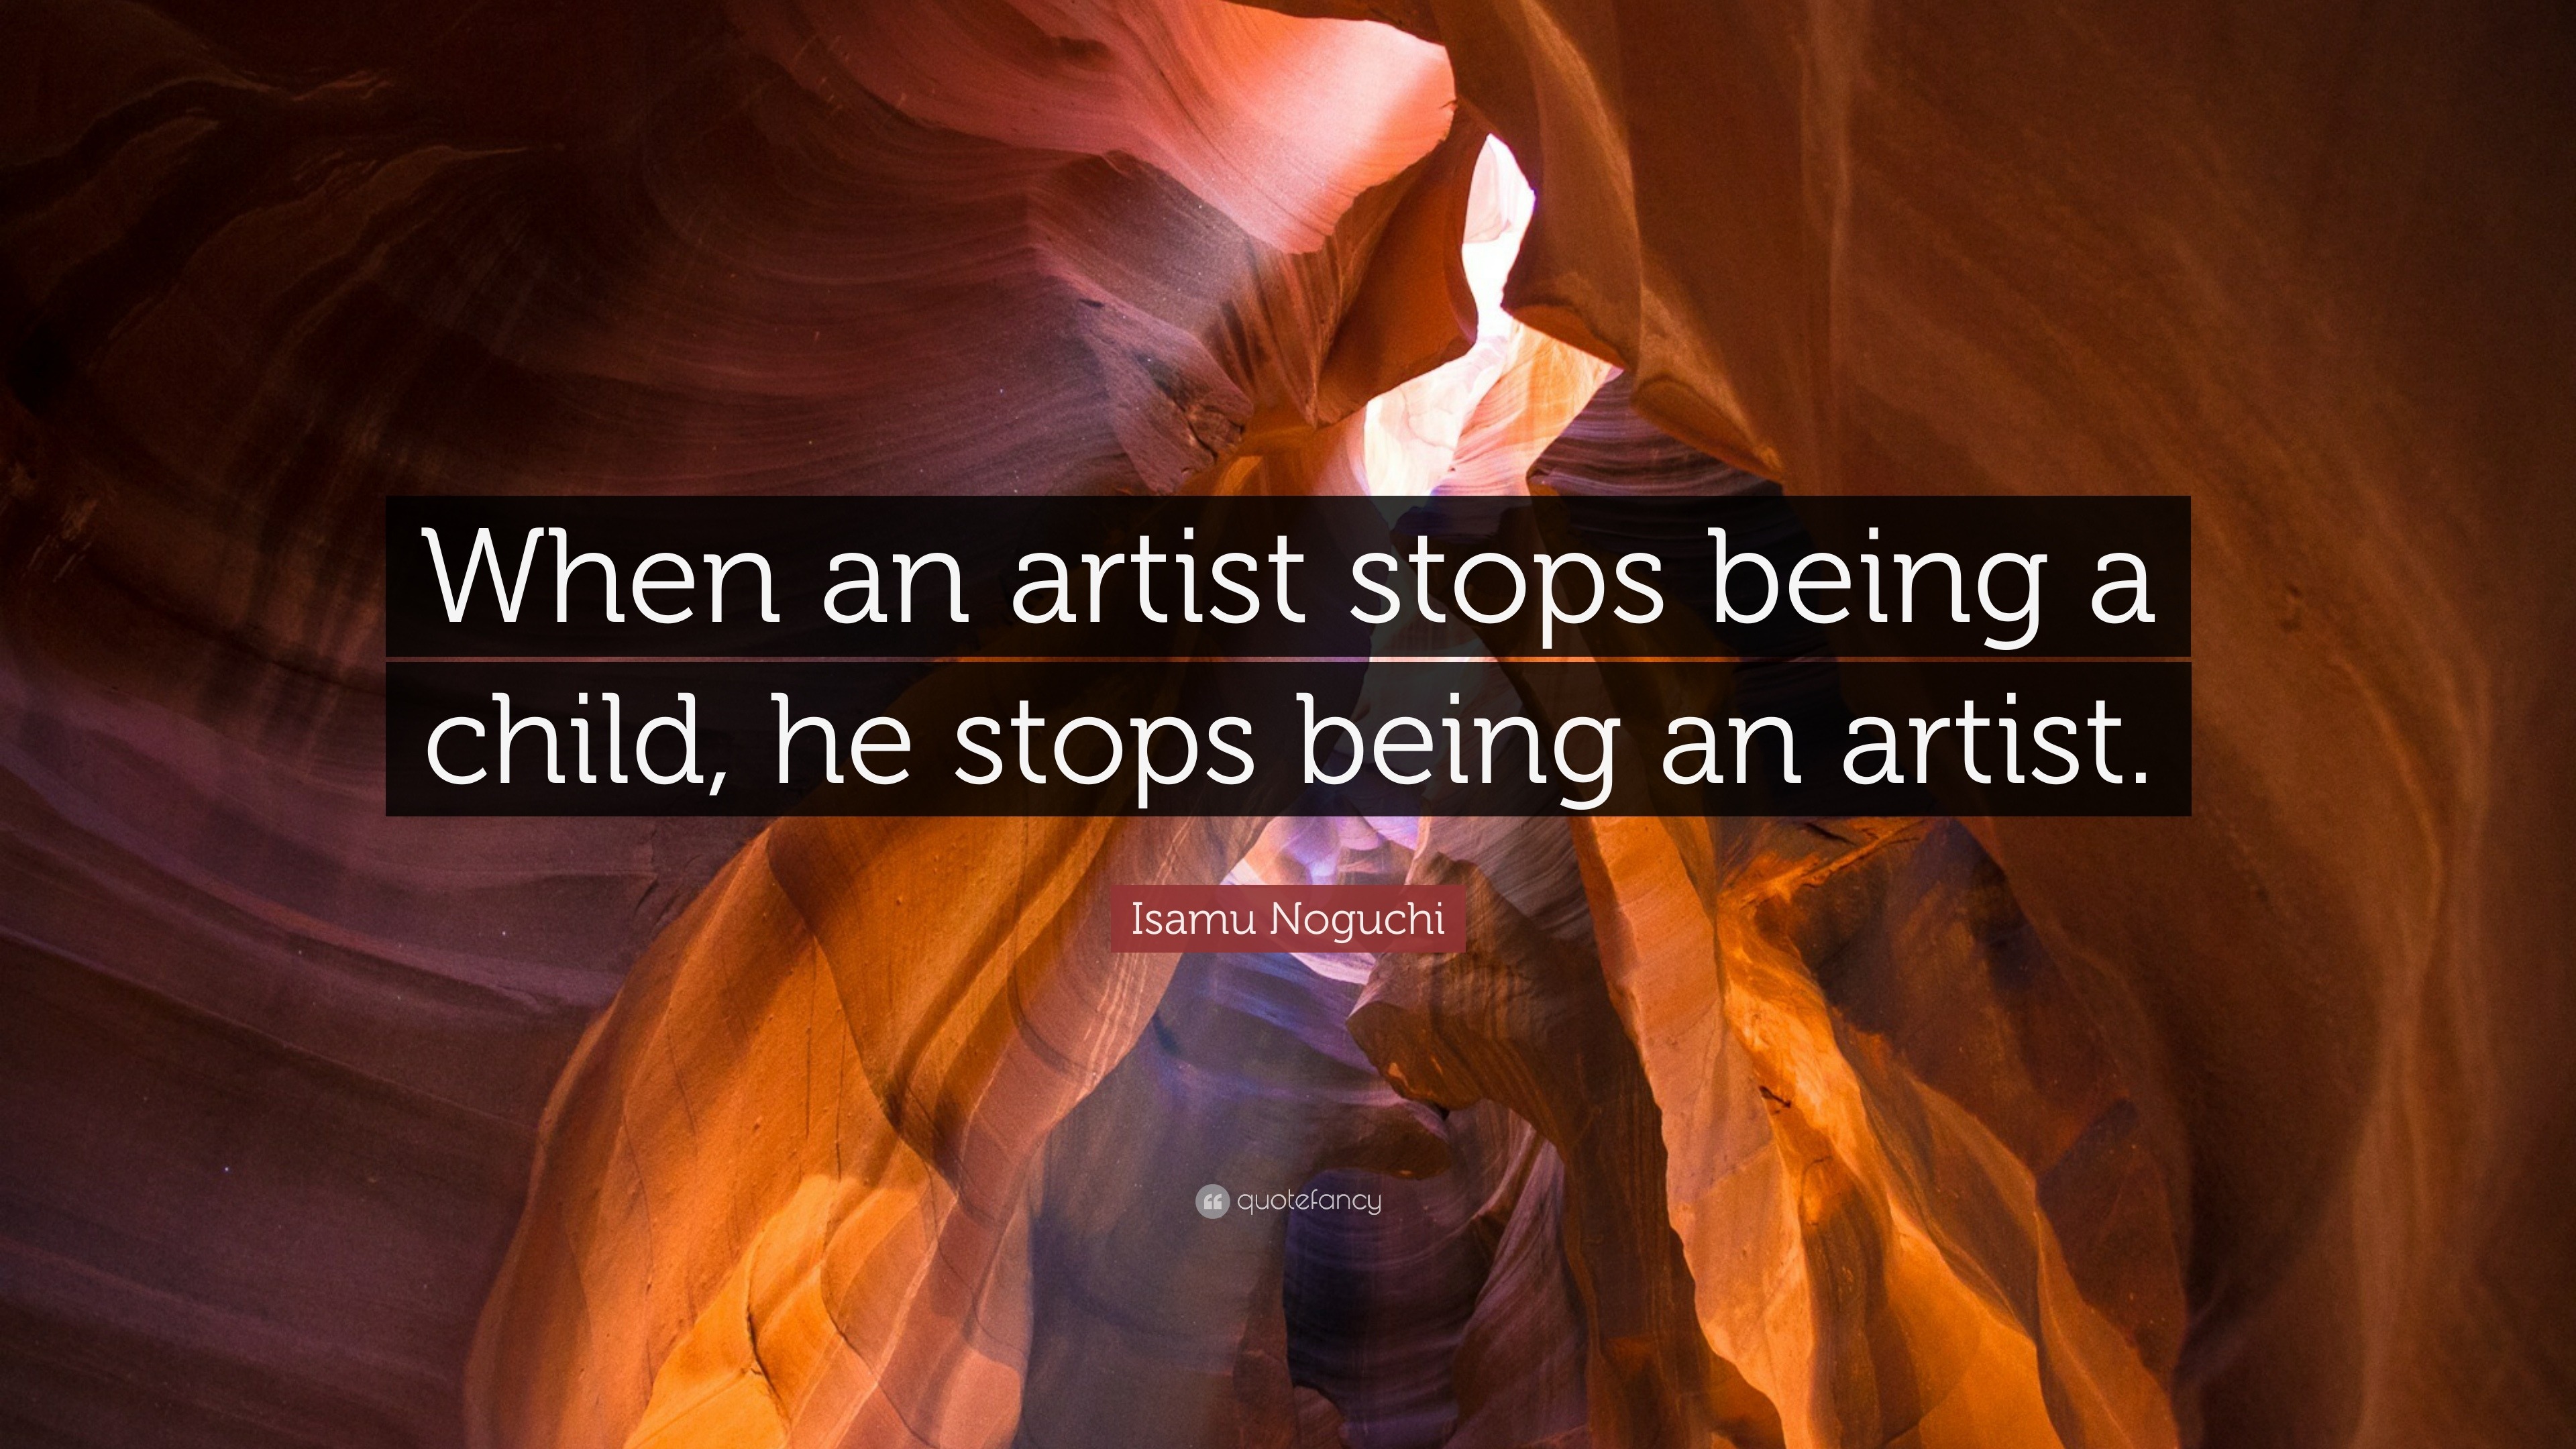 Isamu Noguchi Quote: “When an artist stops being a child, he stops